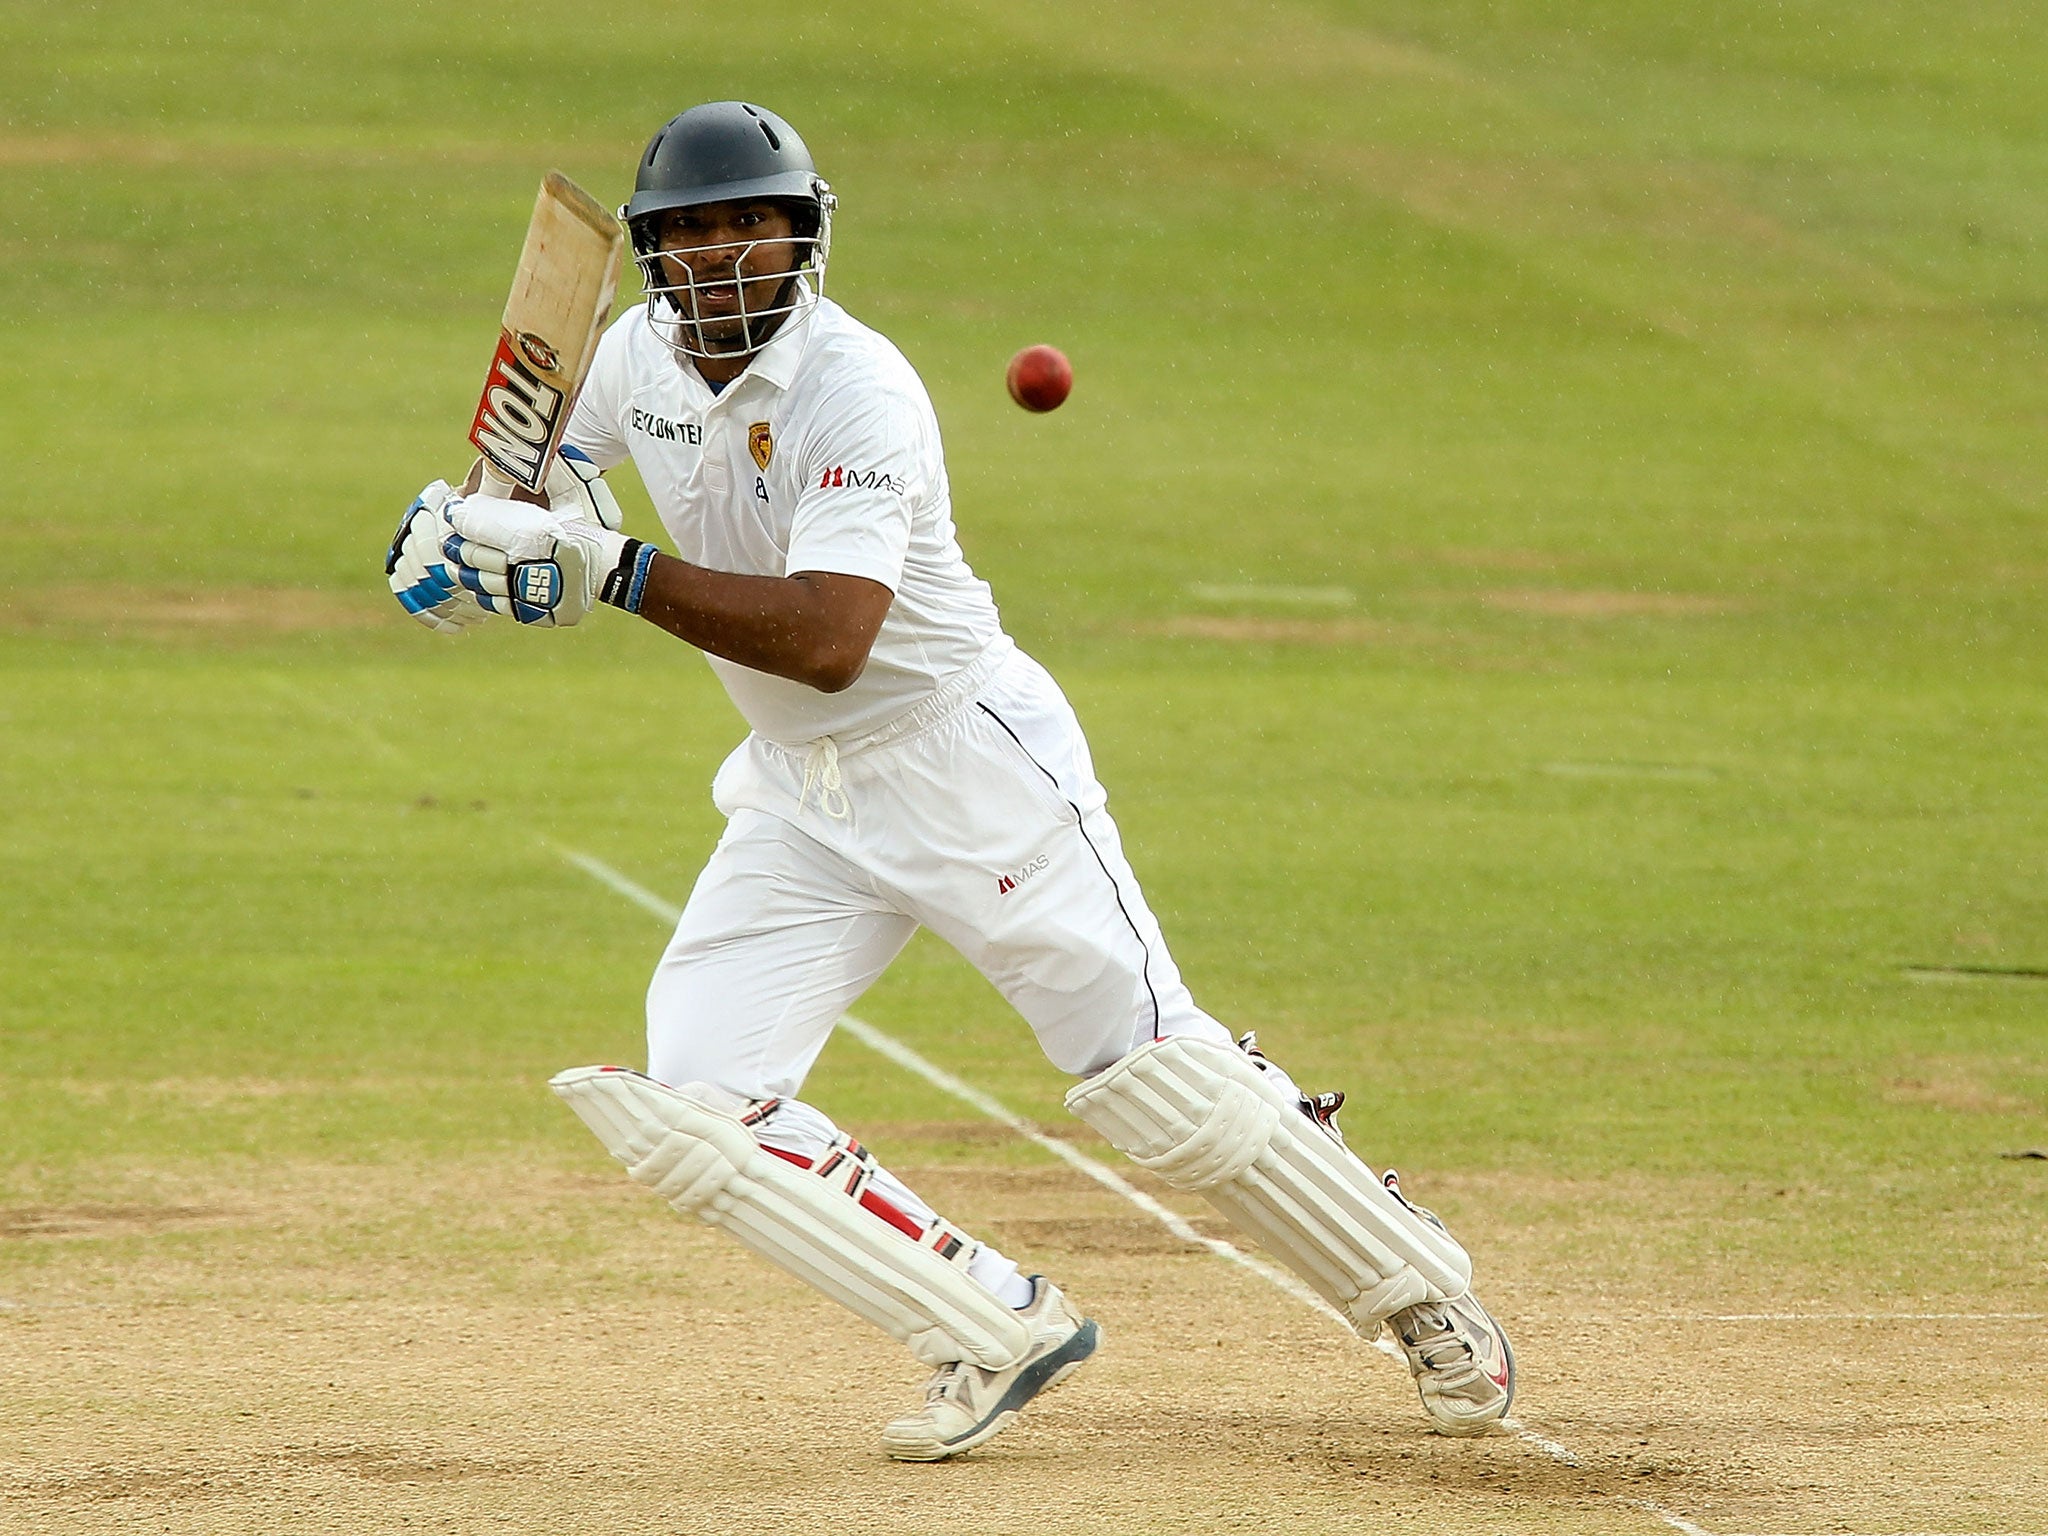 Kumar Sangakkara of Sri Lanka in action during day three of 1st Investec Test match between England and Sri Lanka at Lord's